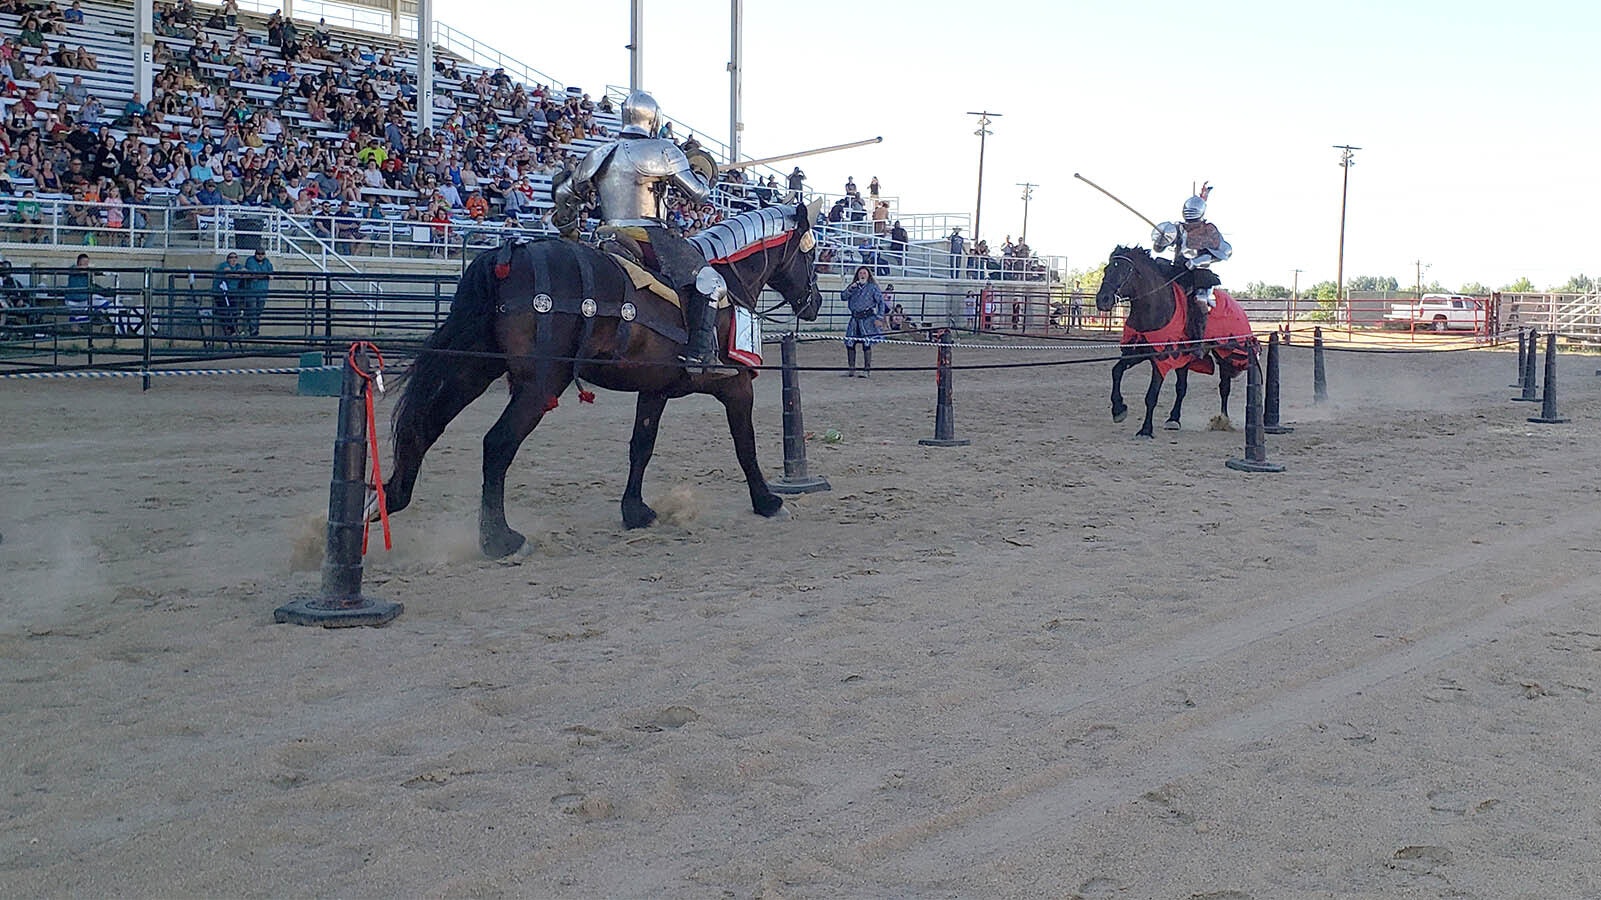 Two knights charge each other at full speed, lances at the ready, during the Tournament of Knights in Sheridan.